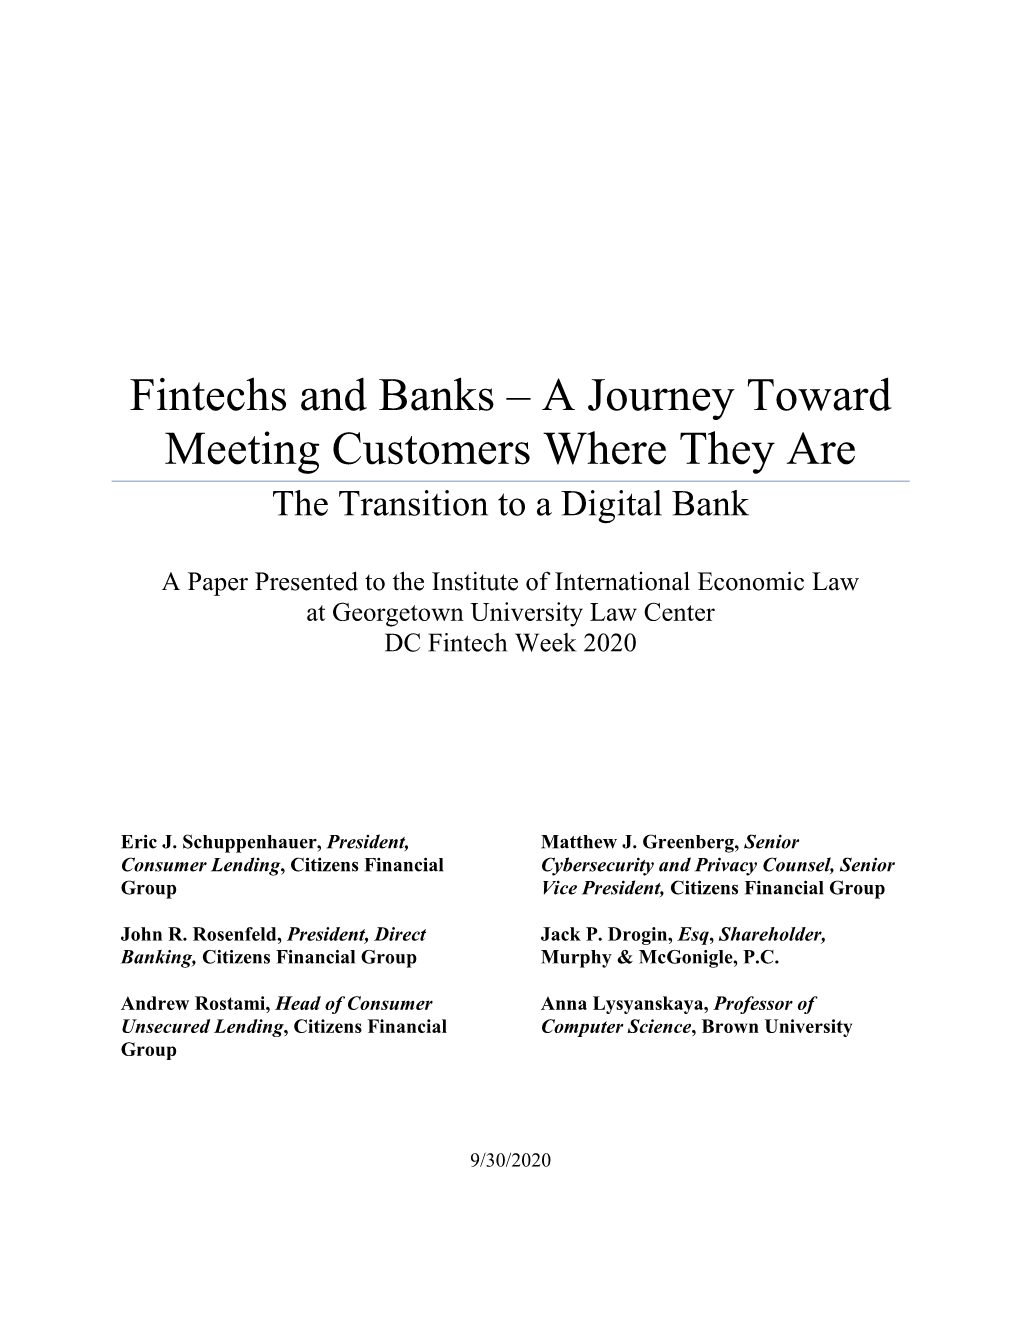 Fintechs and Banks – a Journey Toward Meeting Customers Where They Are the Transition to a Digital Bank